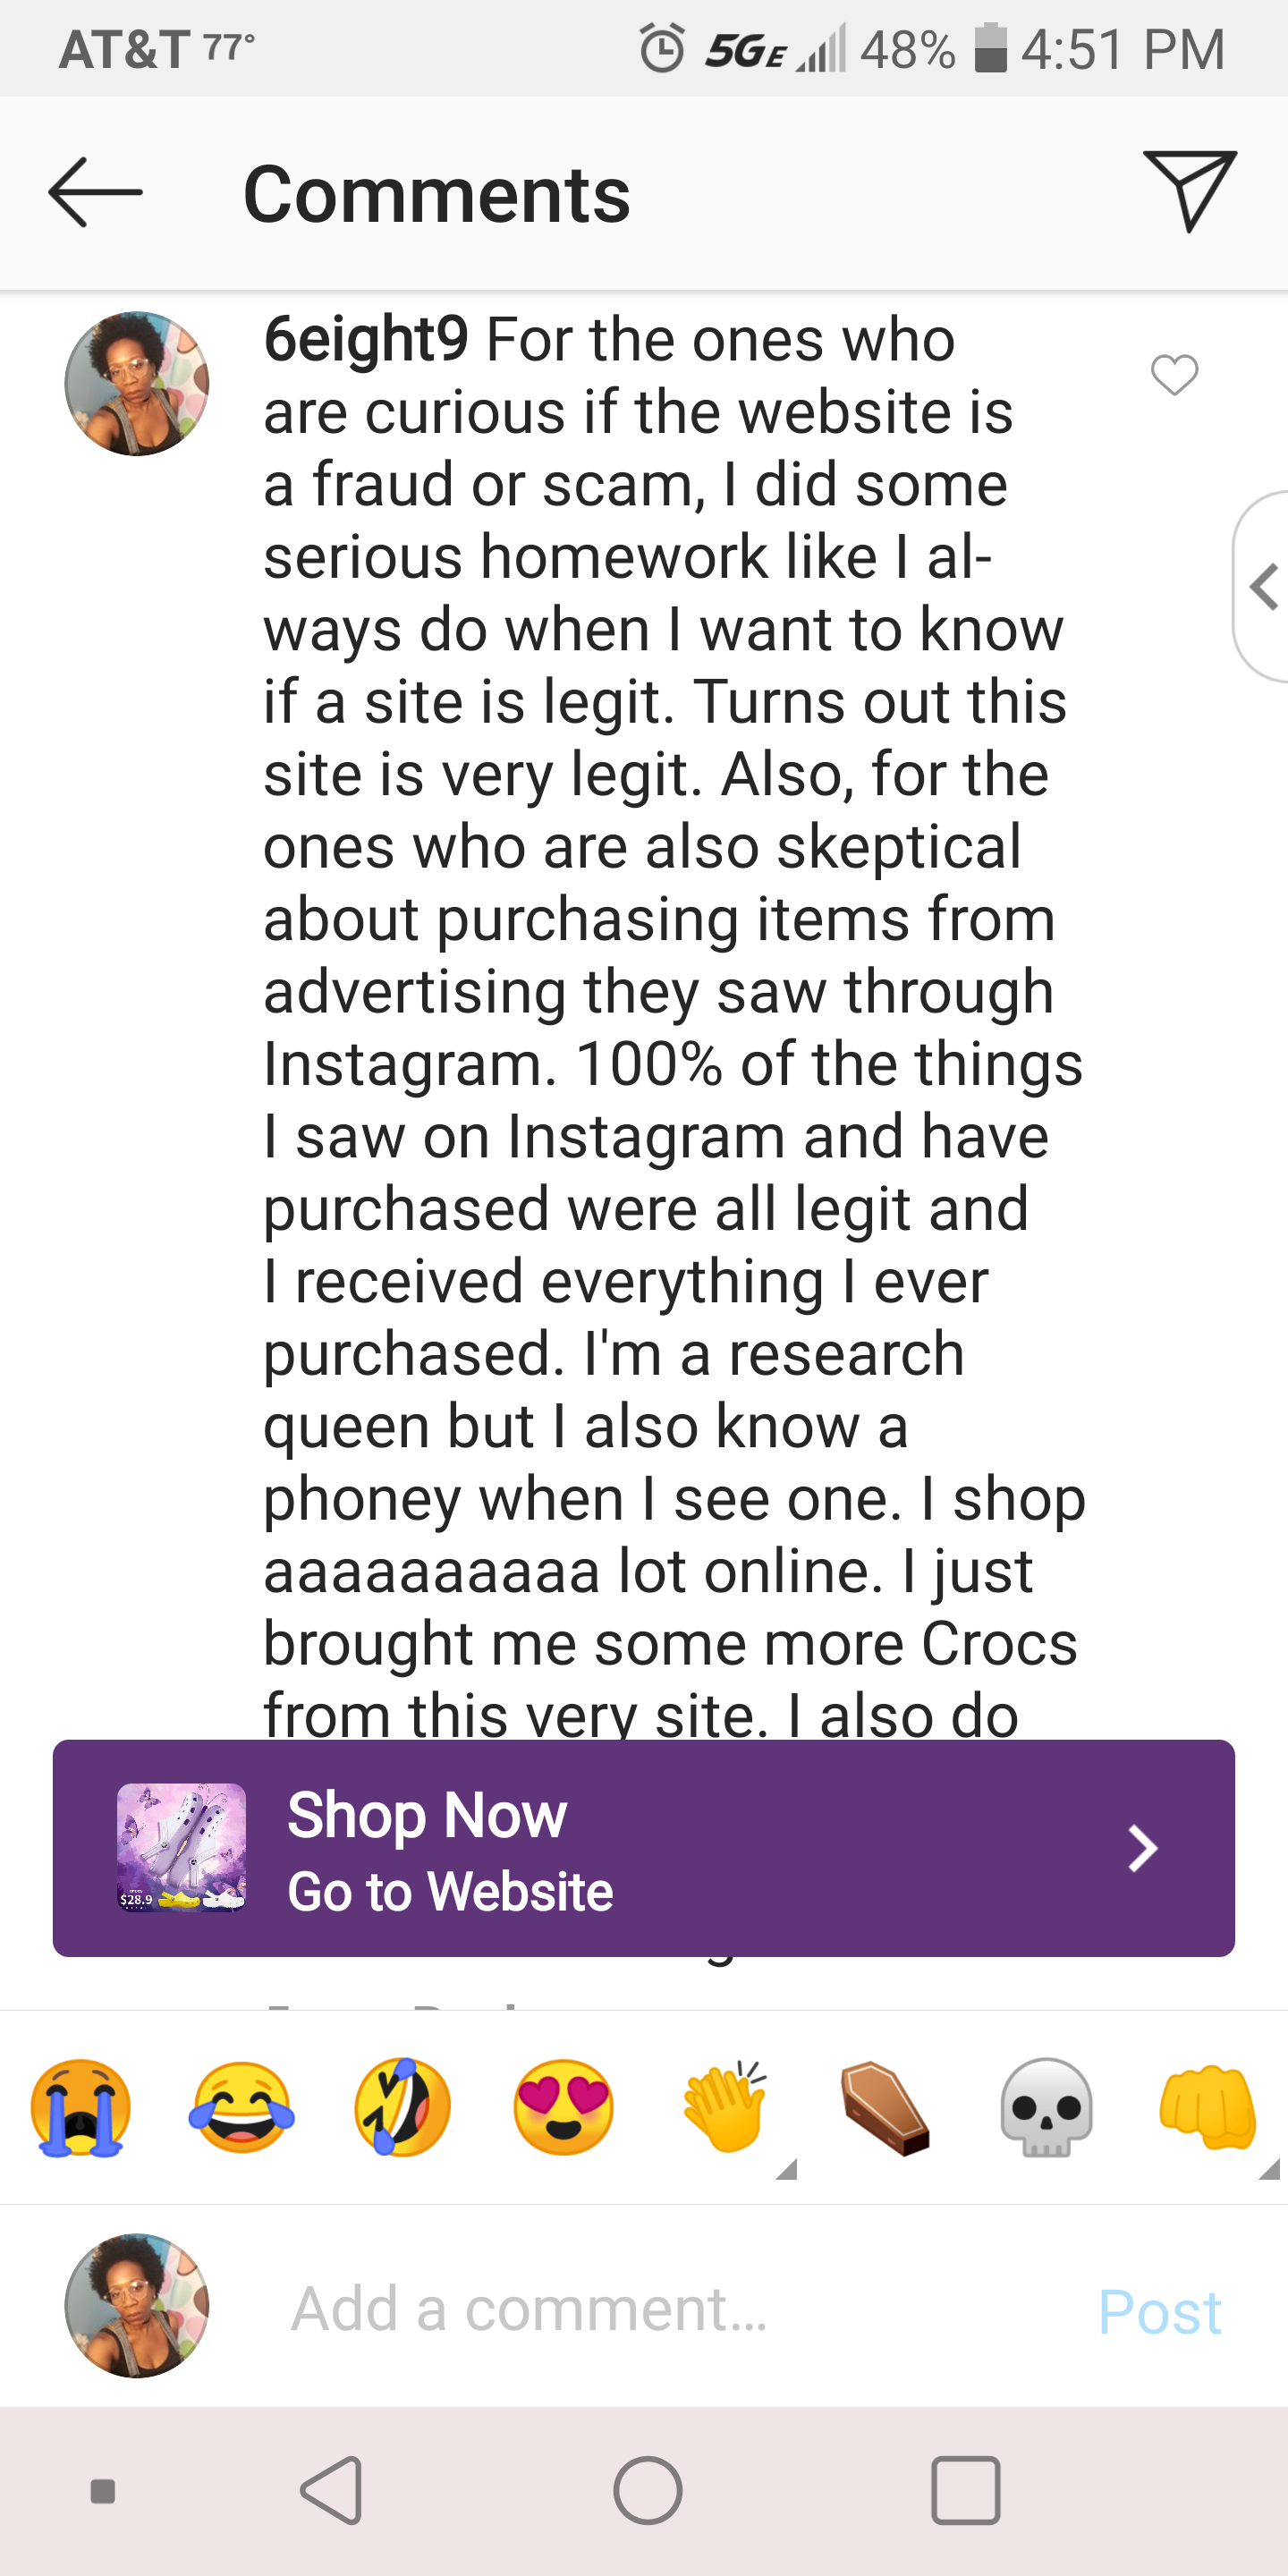 My post giving the company "Stylomo Store" props